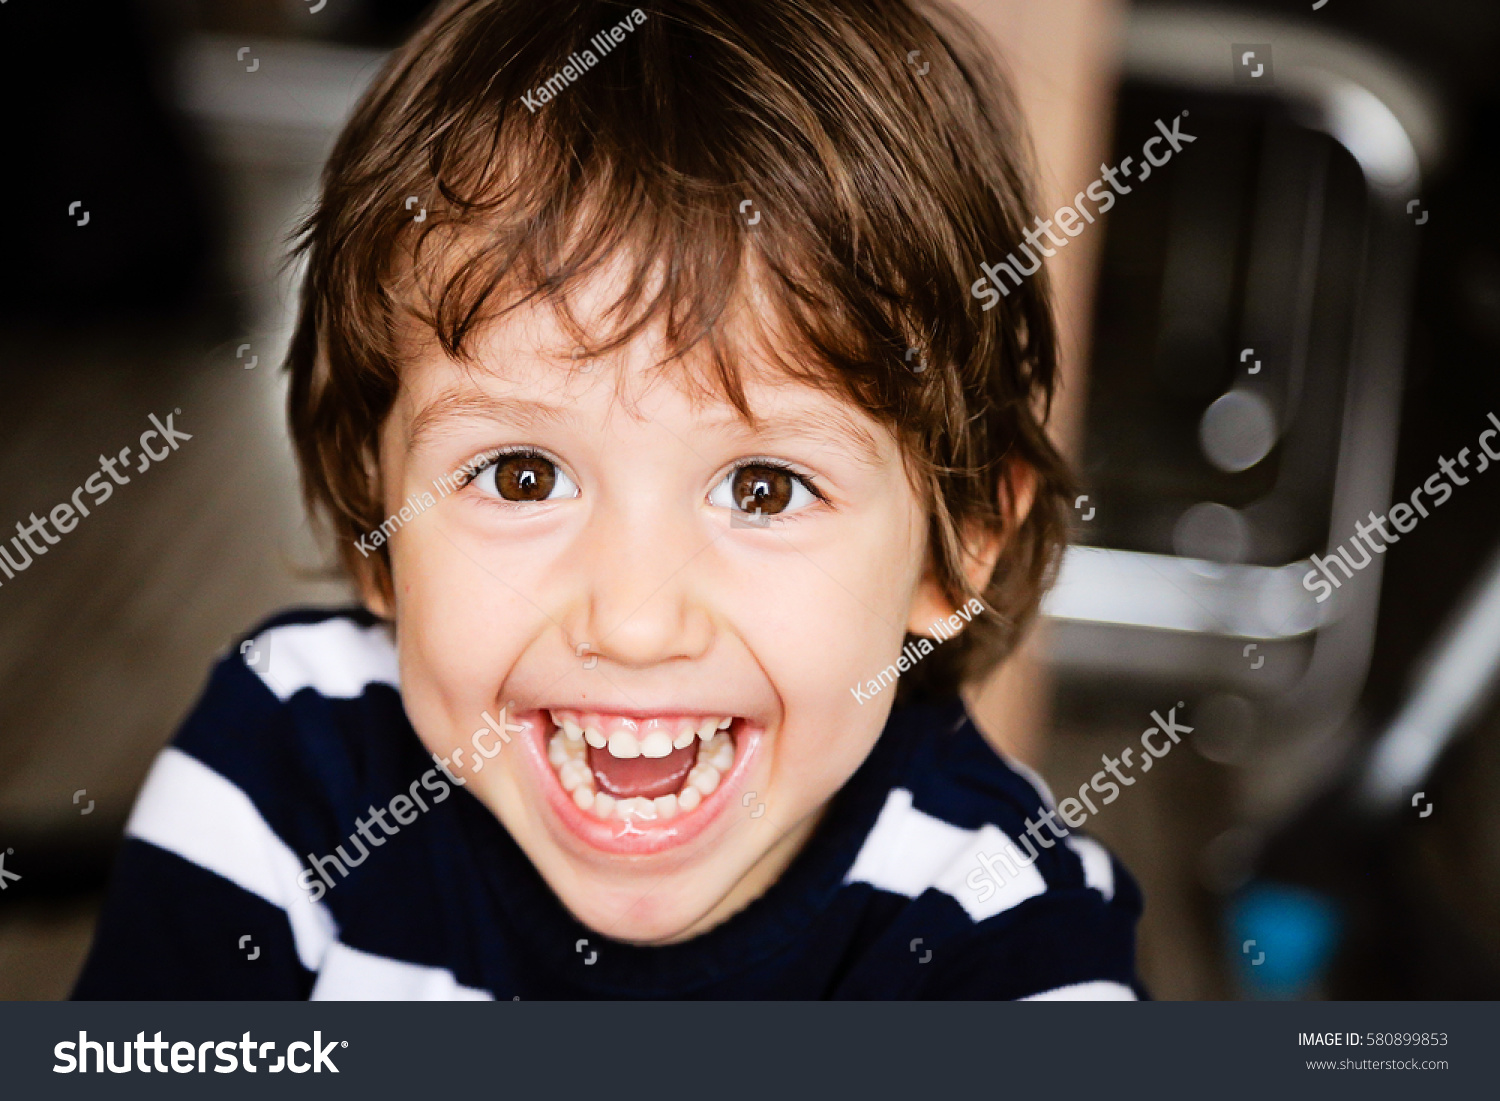 Portrait of happy child toddler boy smiling and laughing close up #580899853